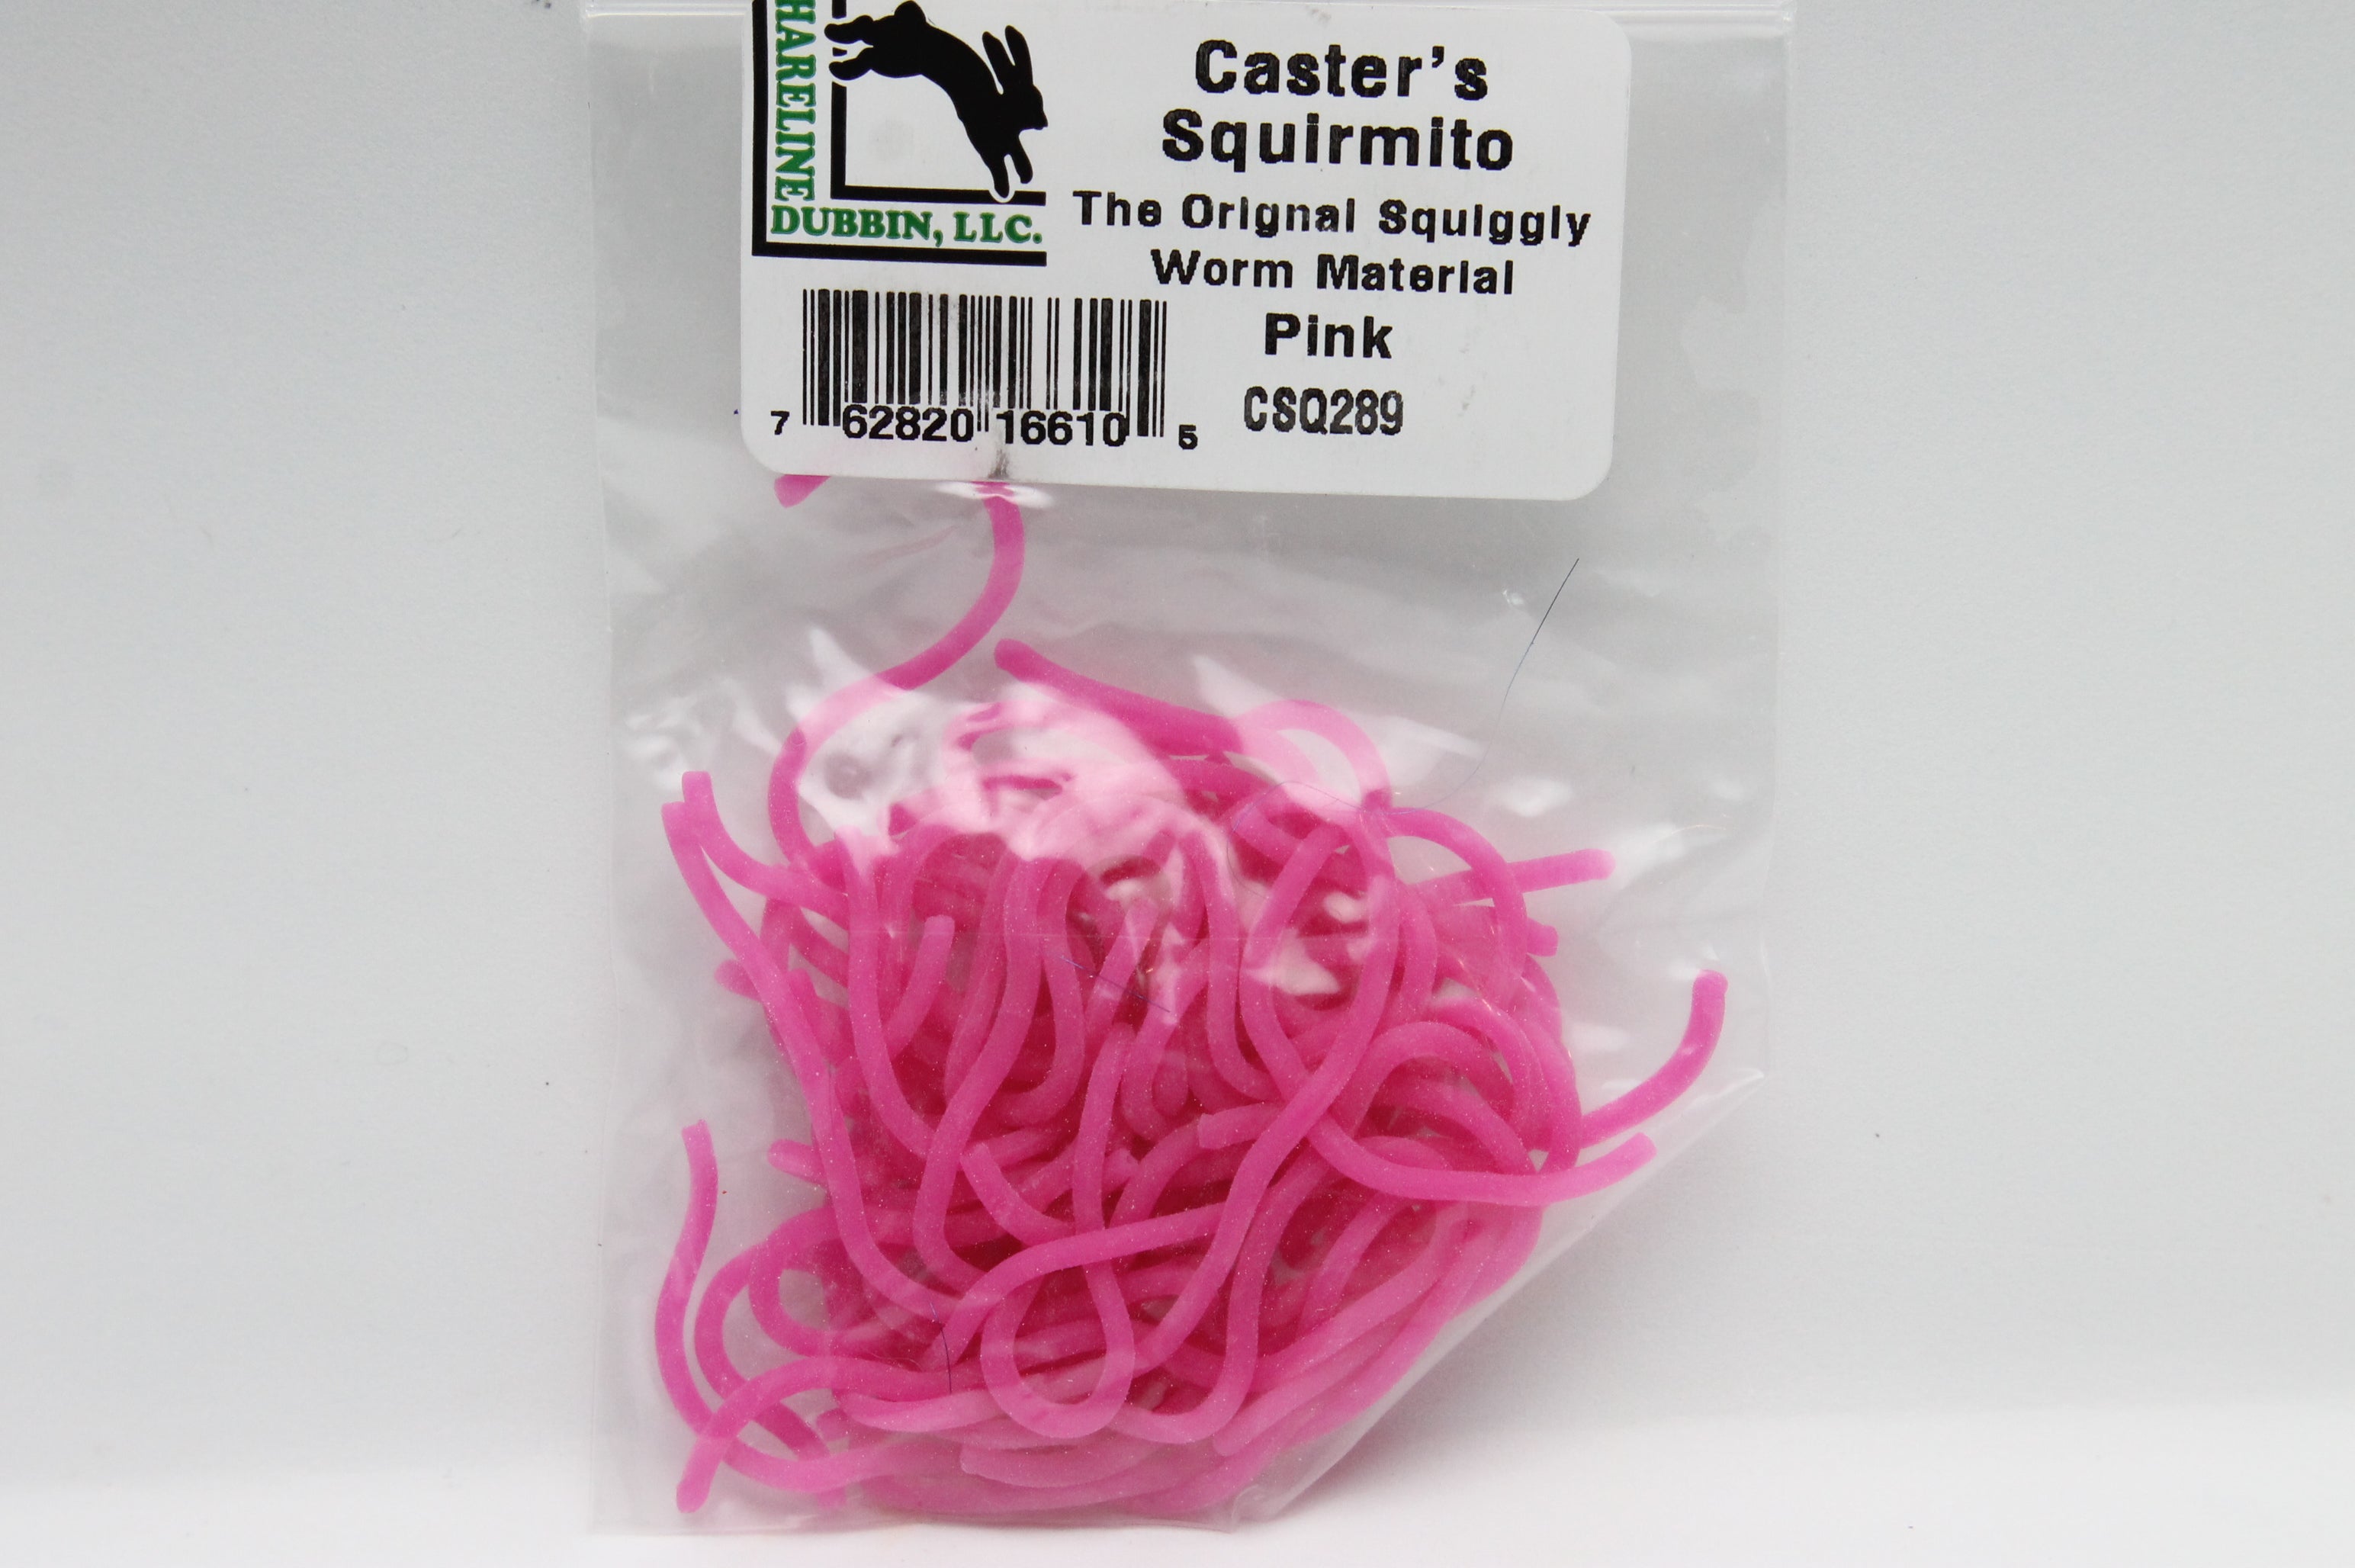 Caster's Squirmito - squirmy worm material